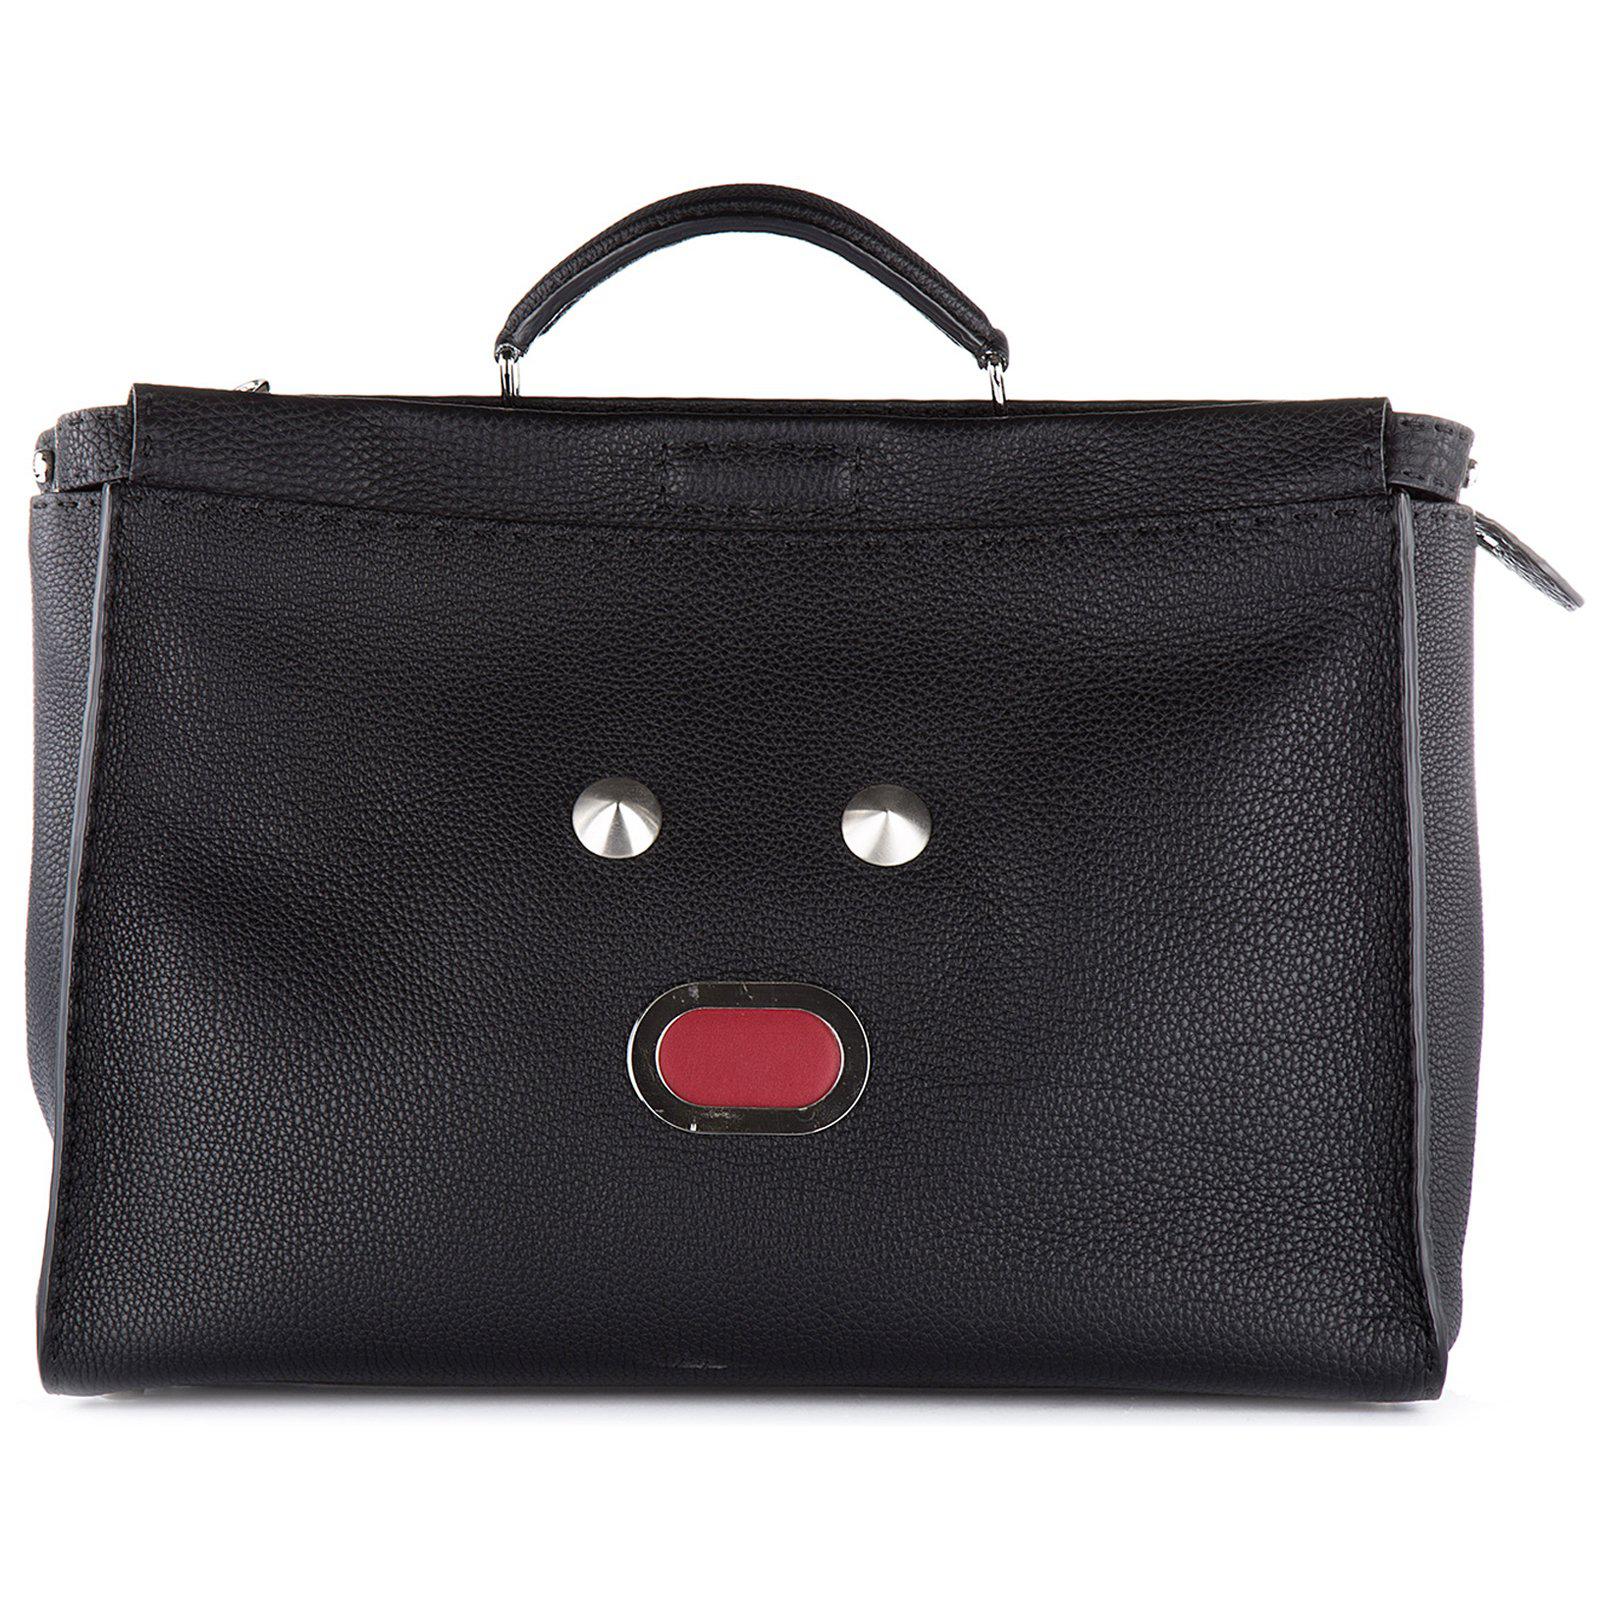 Fendi Leather Face Tote in Black - Lyst